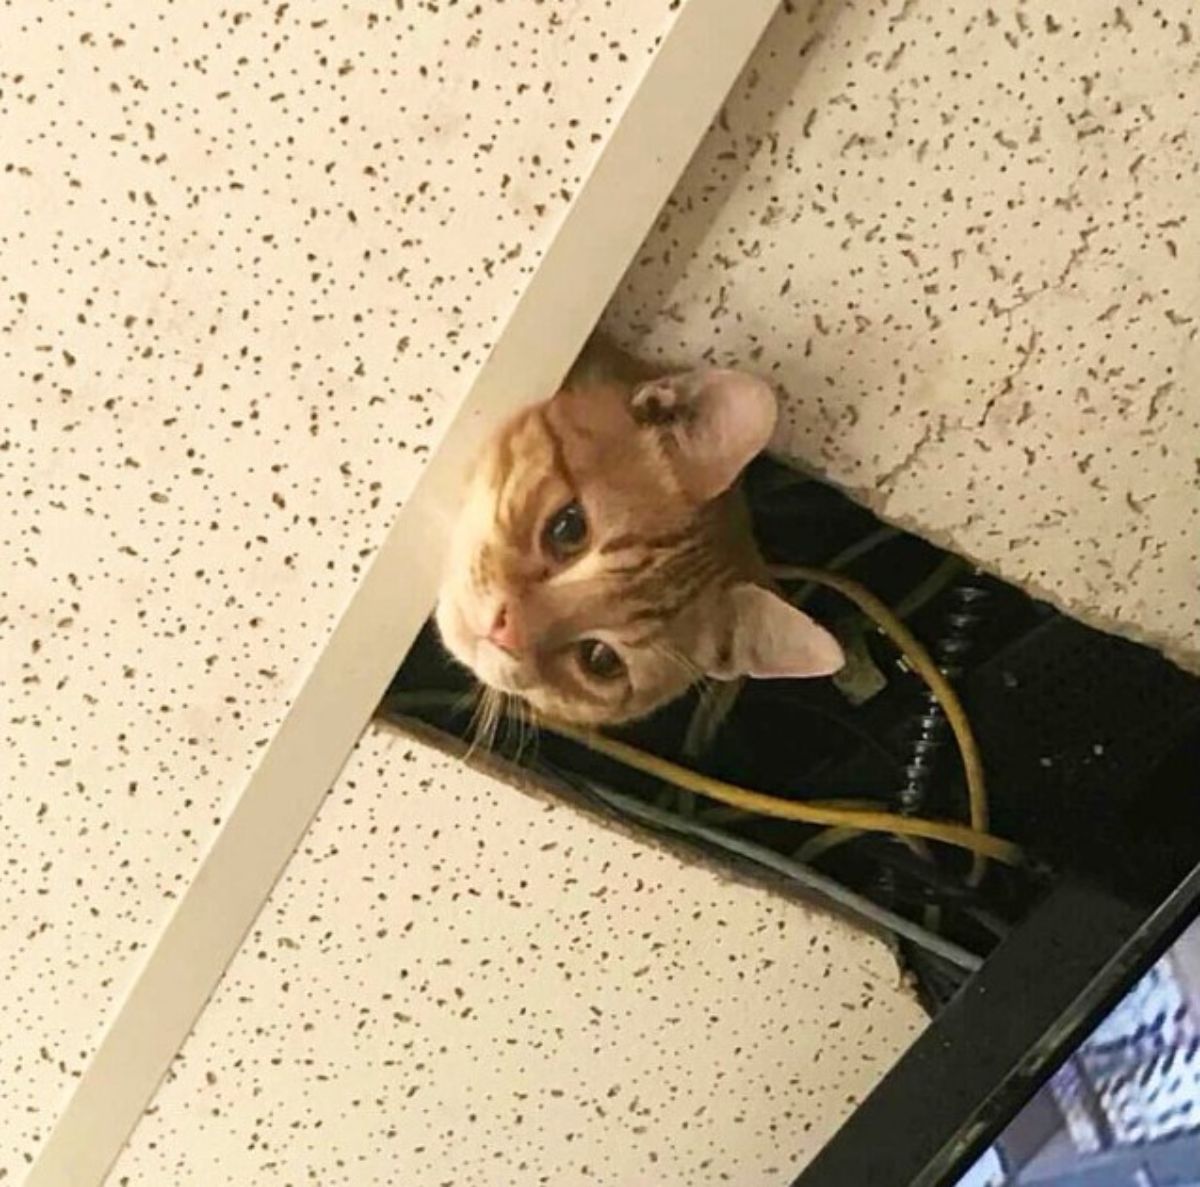 brown and white tabby cat's head peeking from a hole in a ceiling